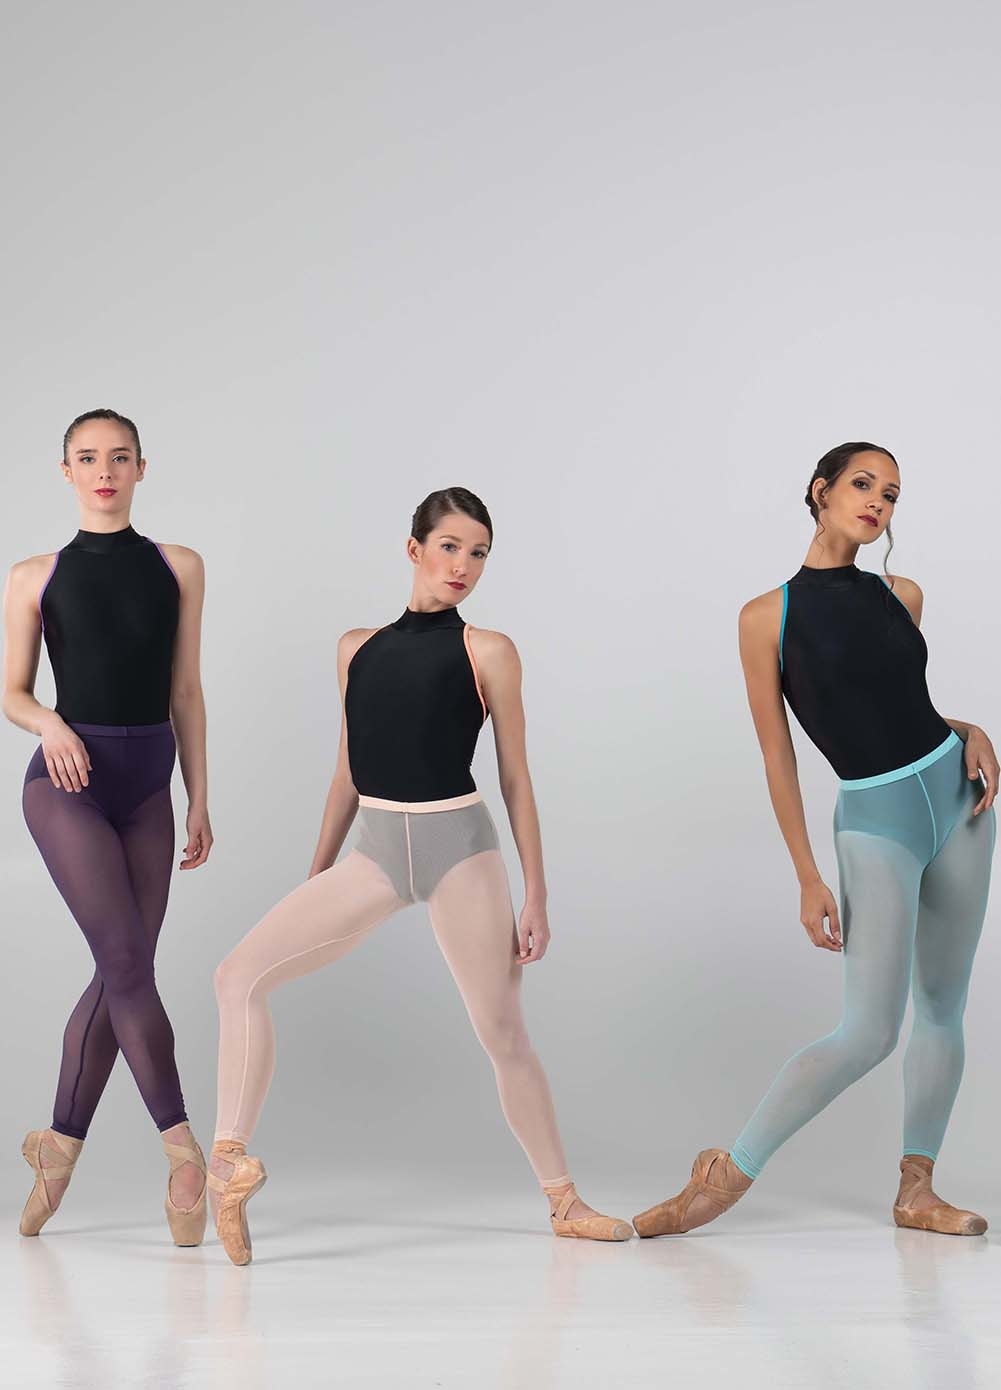 Women's Dance Pants, Ballet Rosa, Laetitia Leggings, $48.00, from VEdance  LLC, The very best in ballroom and Latin dance shoes and dancewear.